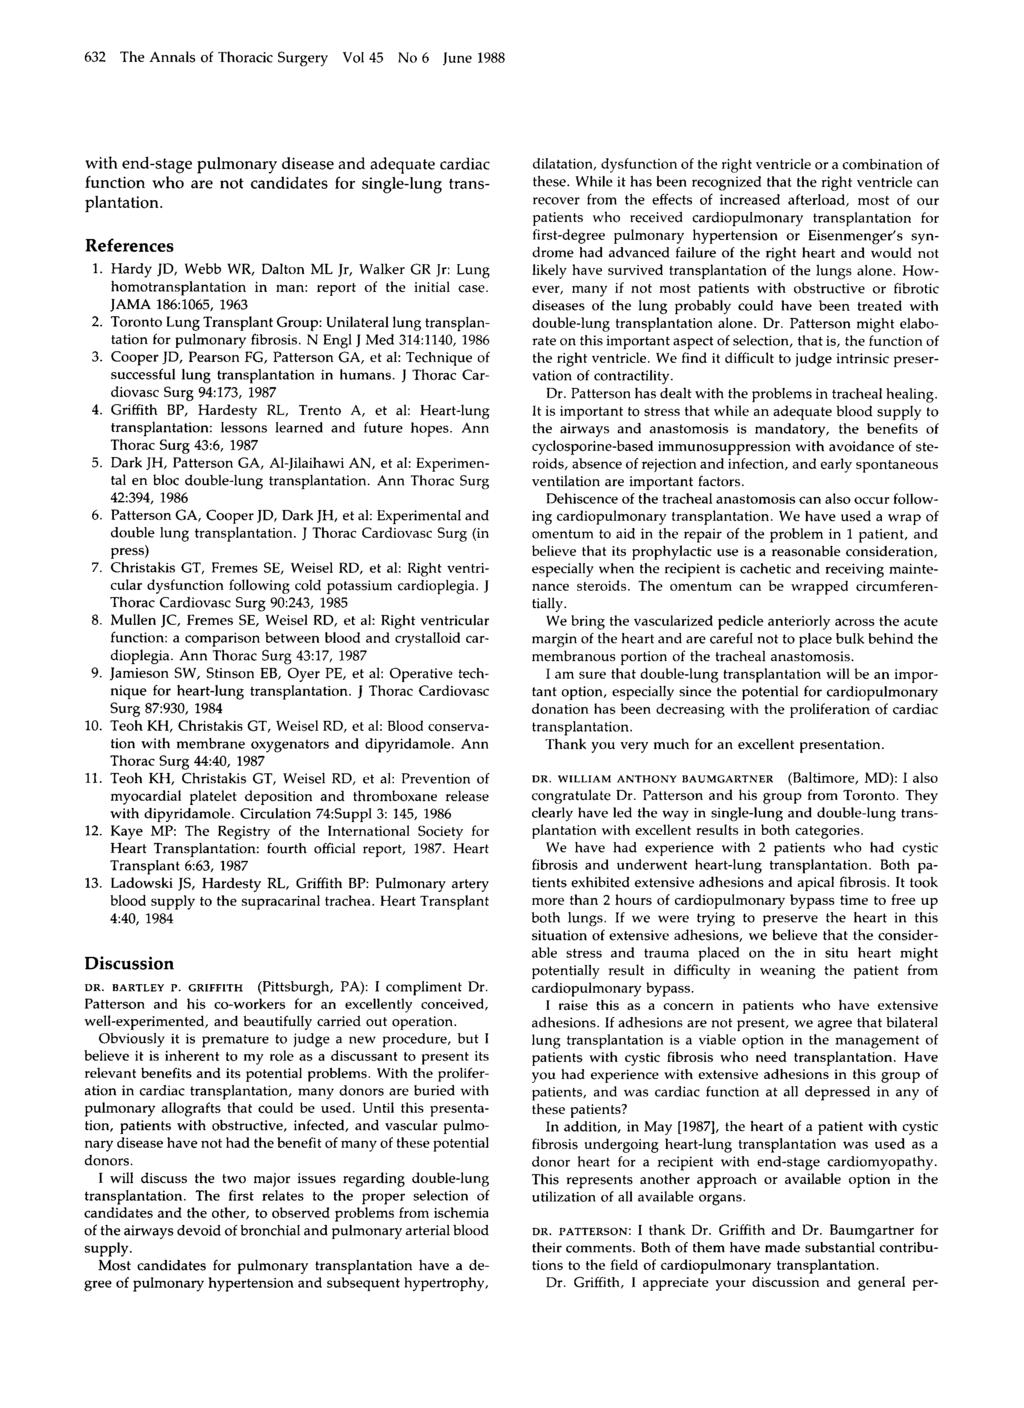 632 The Annals of Thoracic Surgery Vol 45 No 6 June 1988 with end-stage pulmonary disease and adequate cardiac function who are not candidates for single-lung transplantation. References 1.